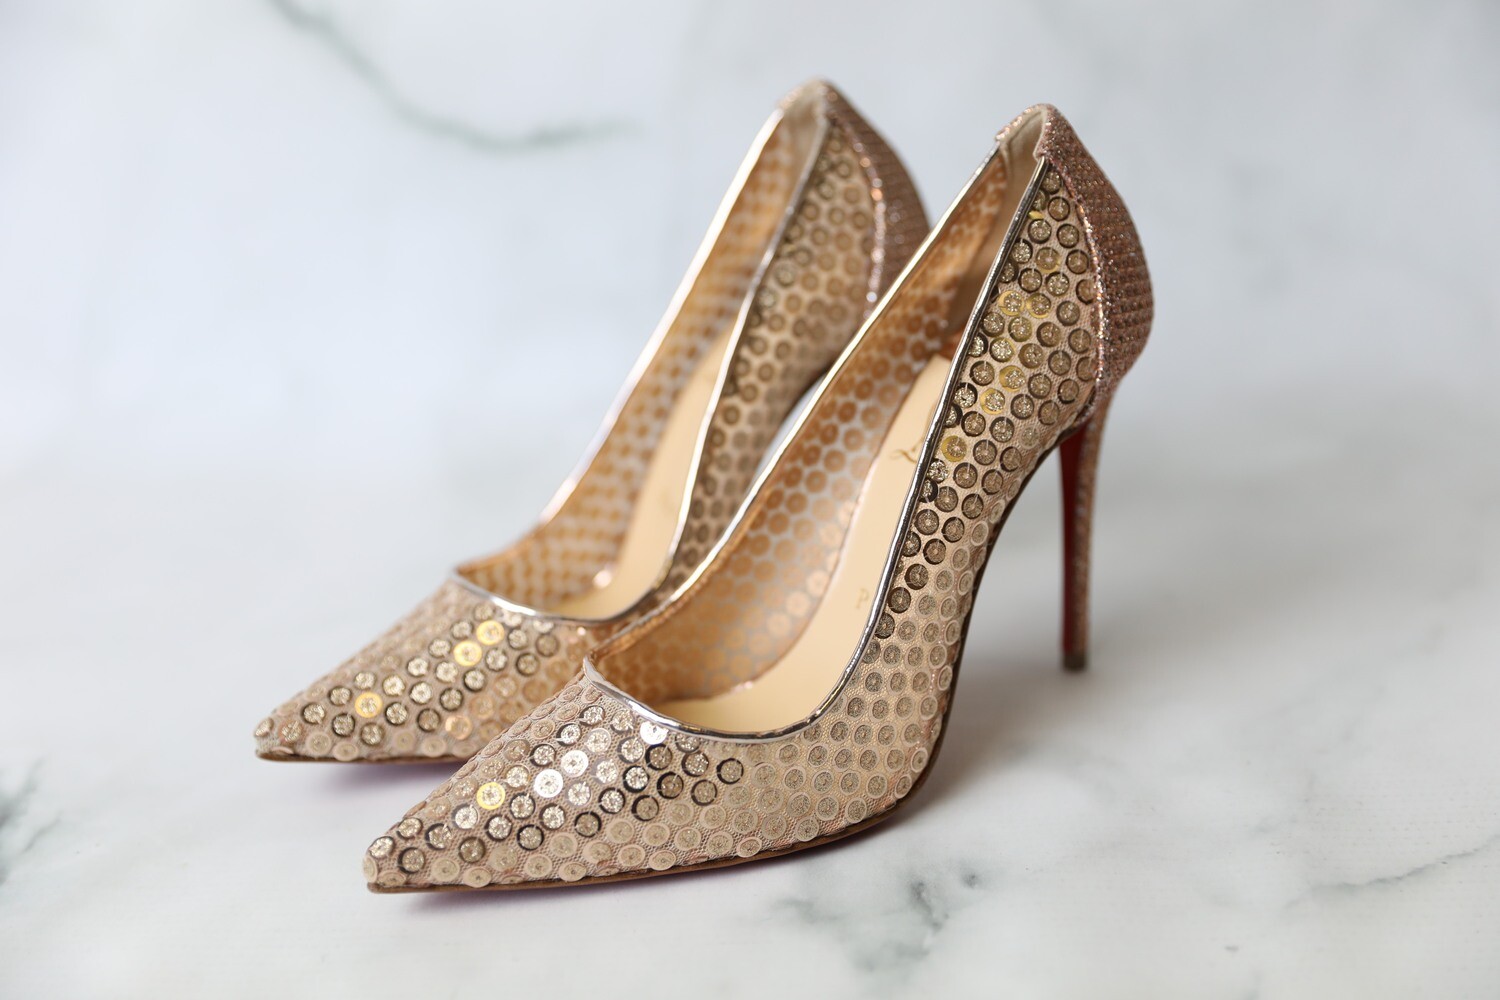 Christian Louboutin Shoes 554 Lace Sequin Nude Gold Point-toe Heels Pumps  100mm, New in Box WA001